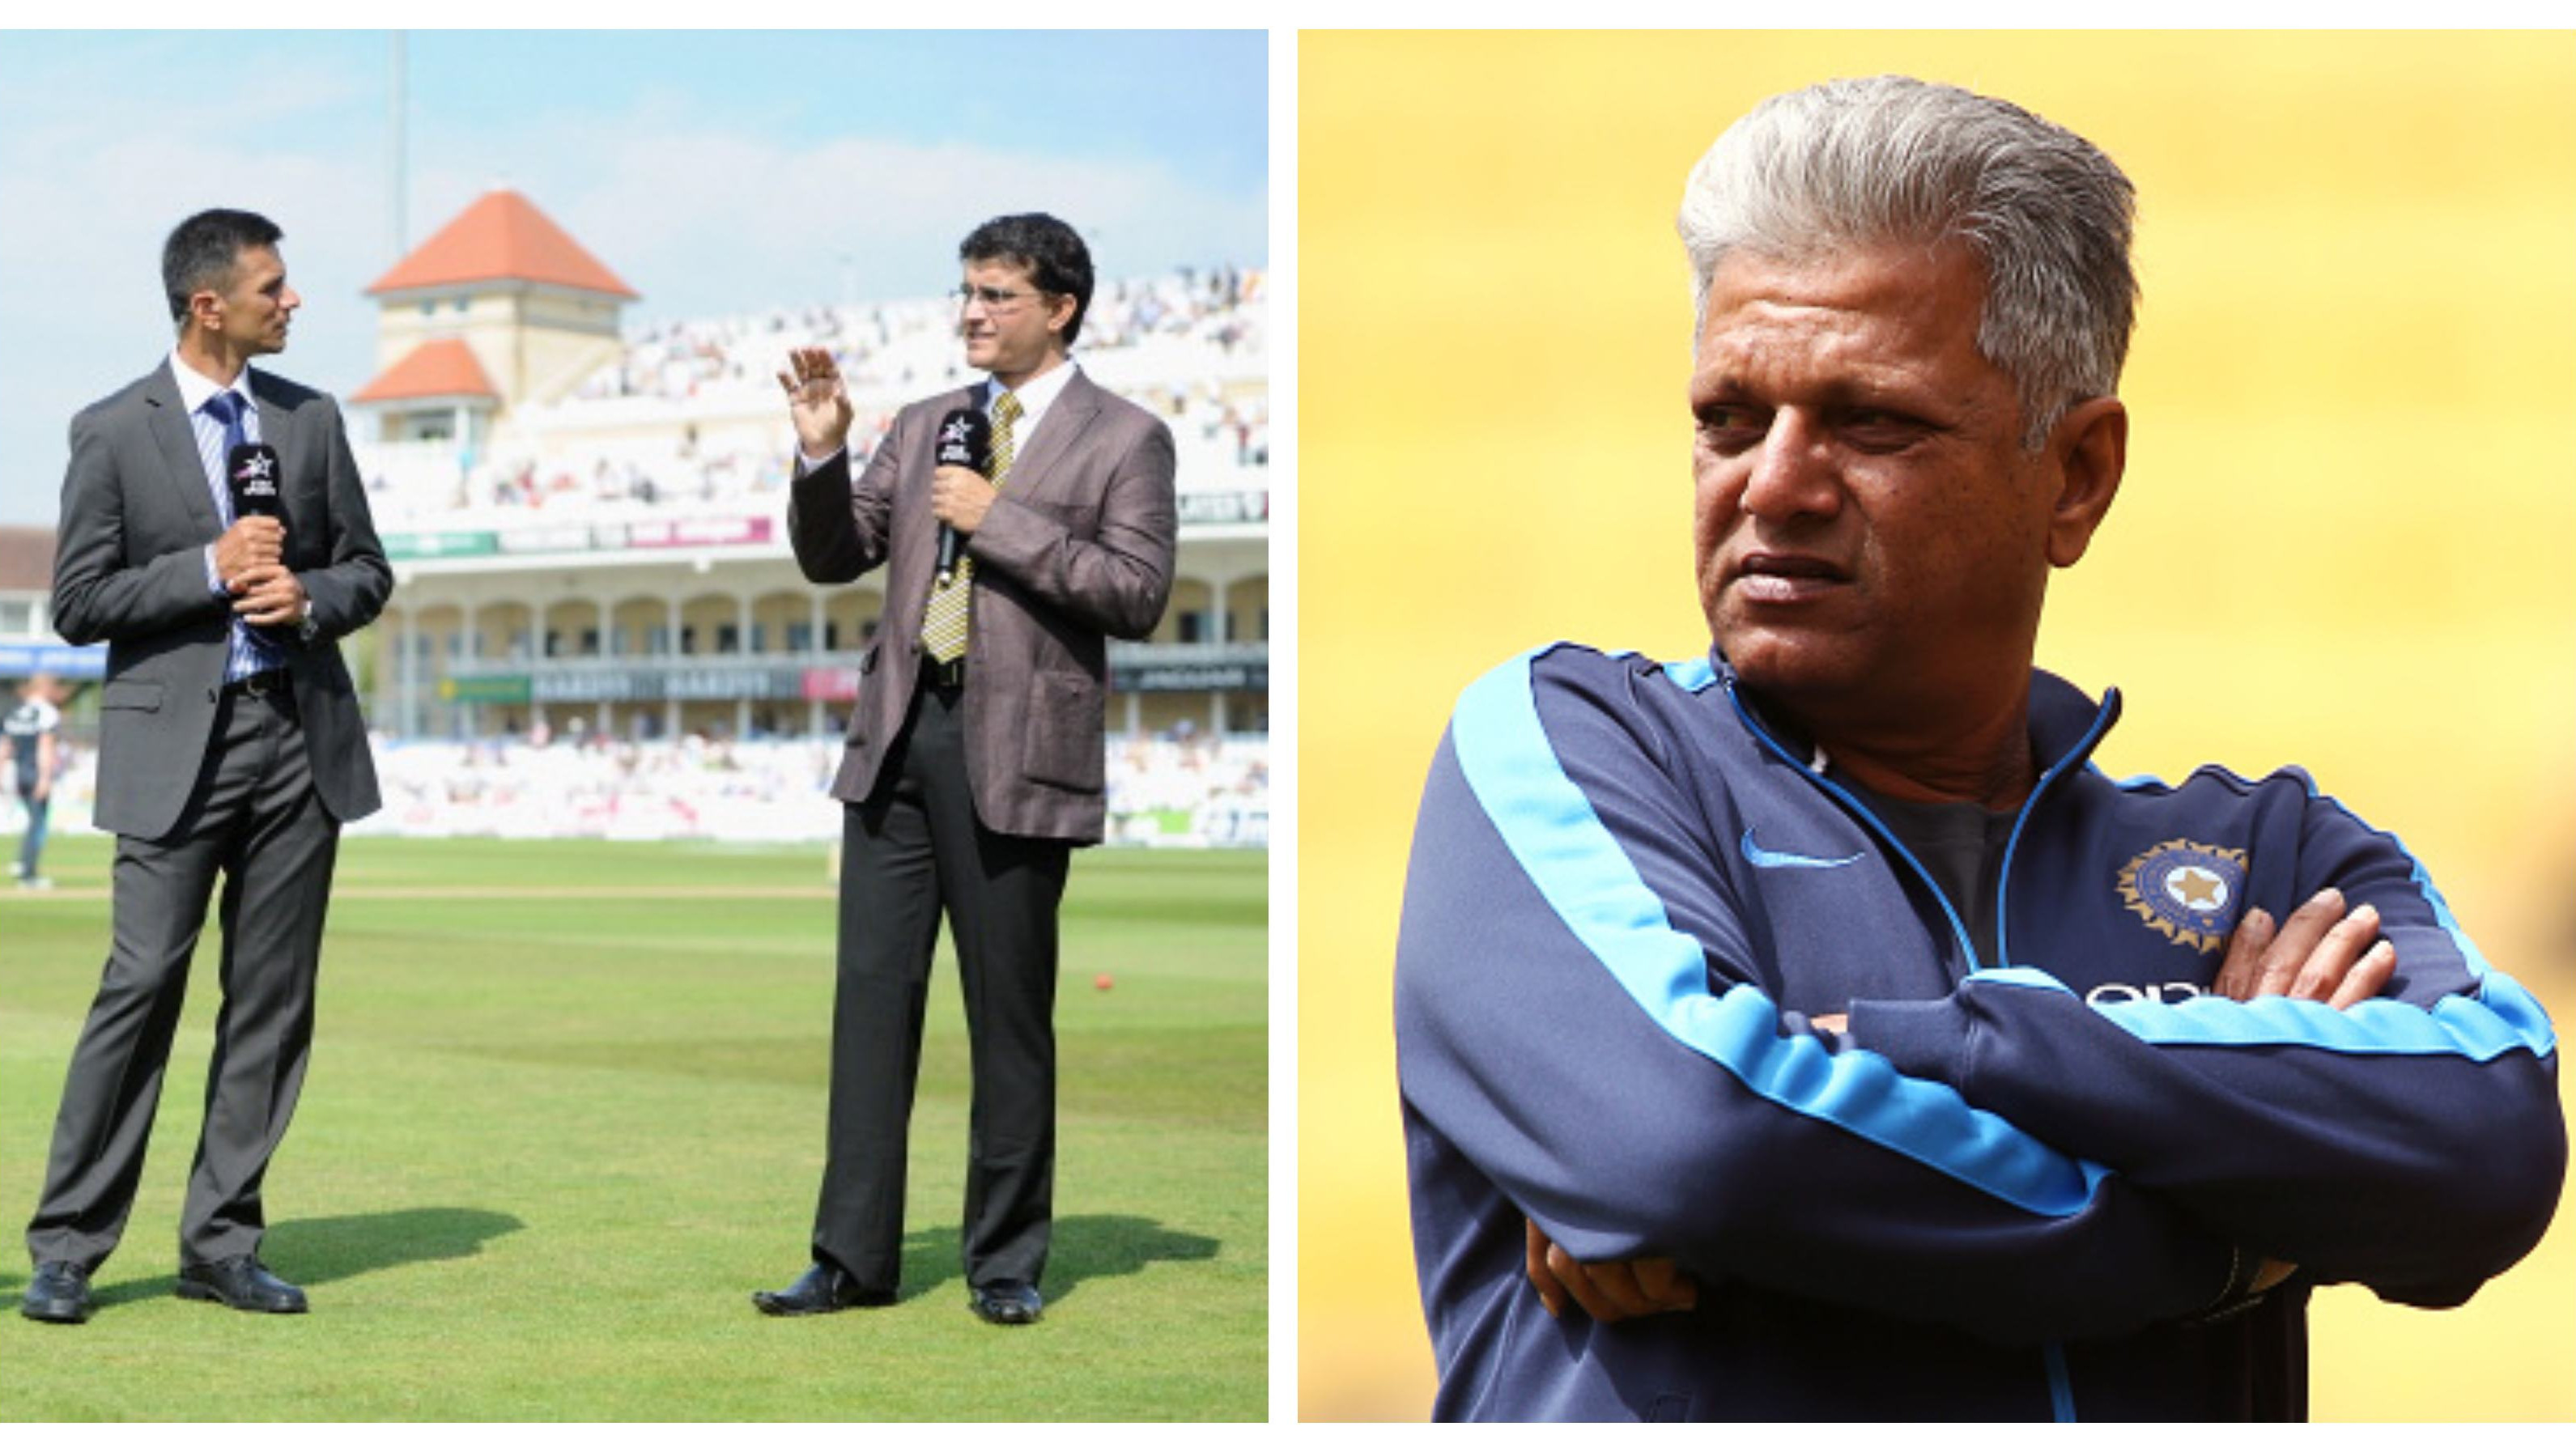 WV Raman opens up about his letter to Ganguly and Dravid; says he sent it to ensure ‘healthy team culture’